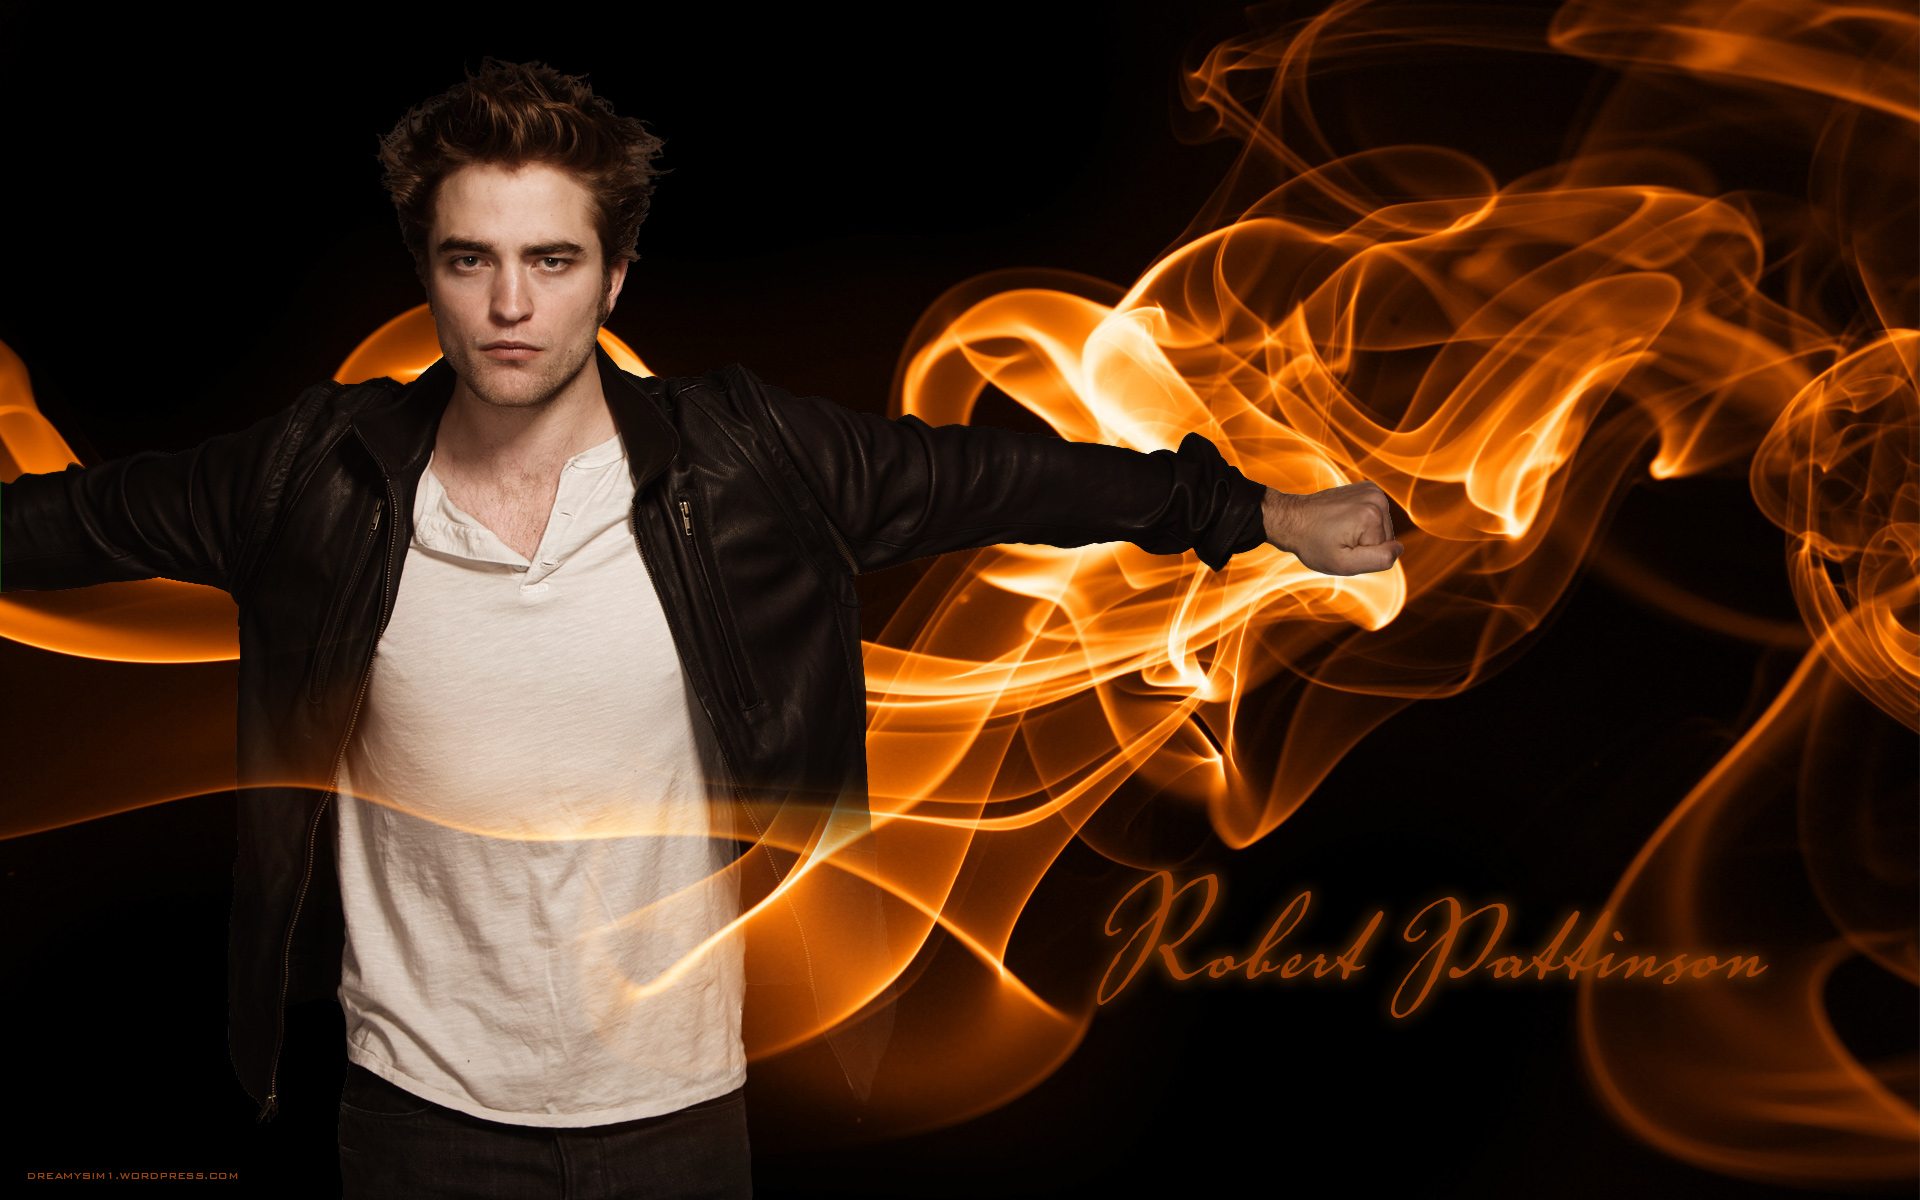 Robert Pattinson Is A Great Wallpaper For Your Puter Desktop And